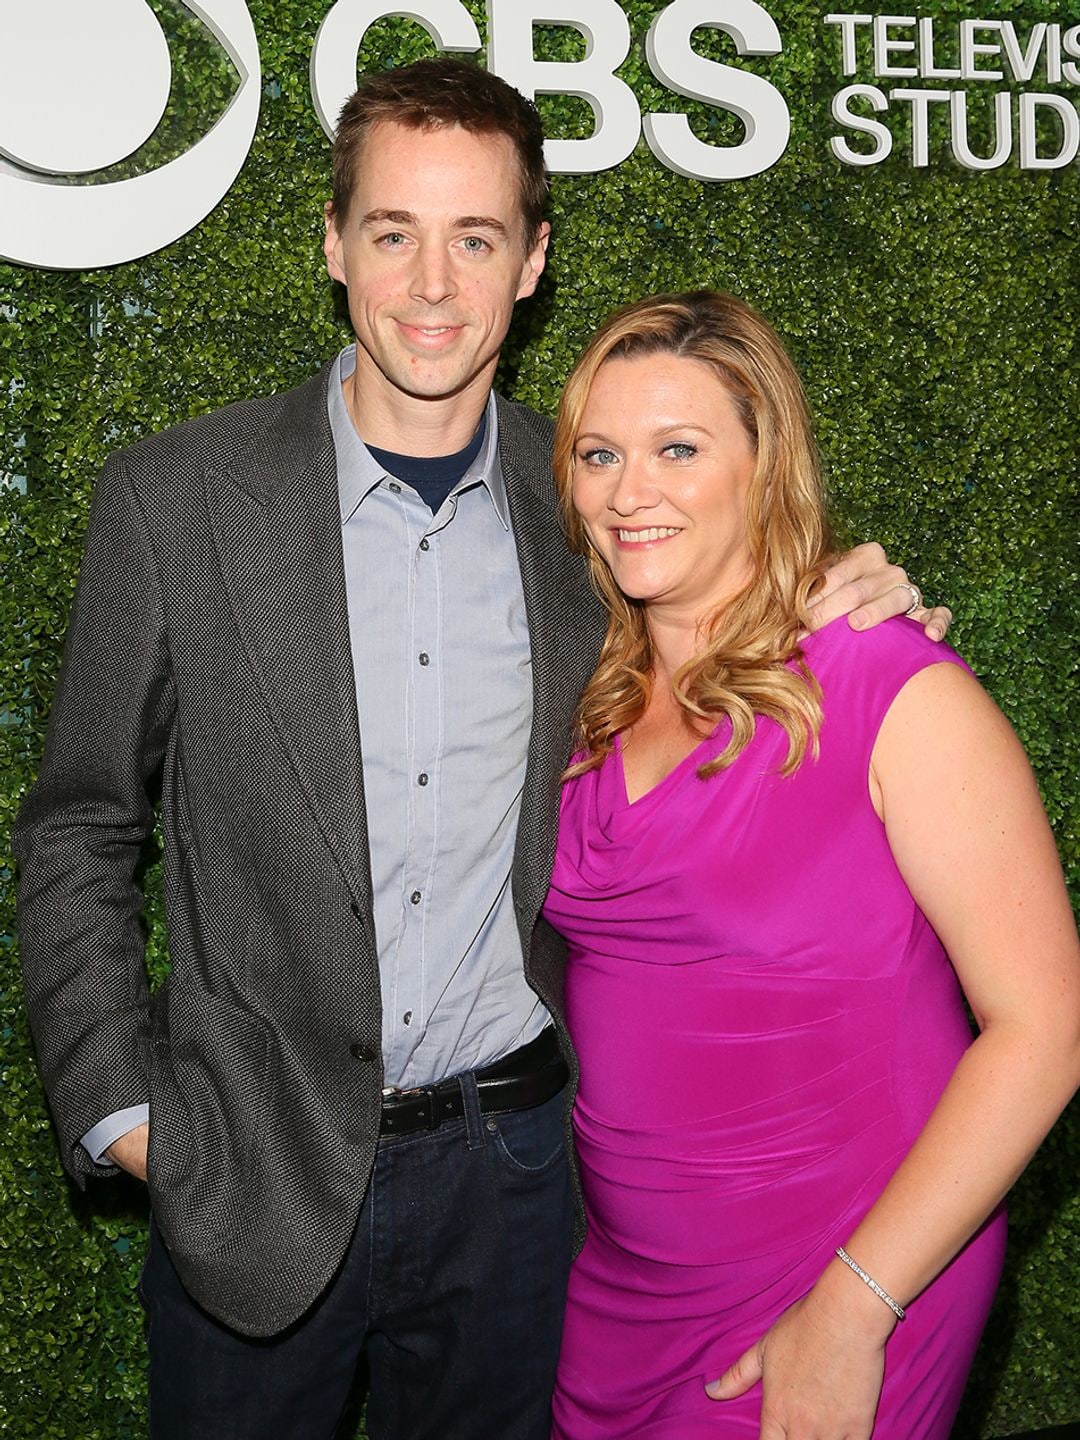 Sean Murray and wife Carrie at a CBS event in 2016. 